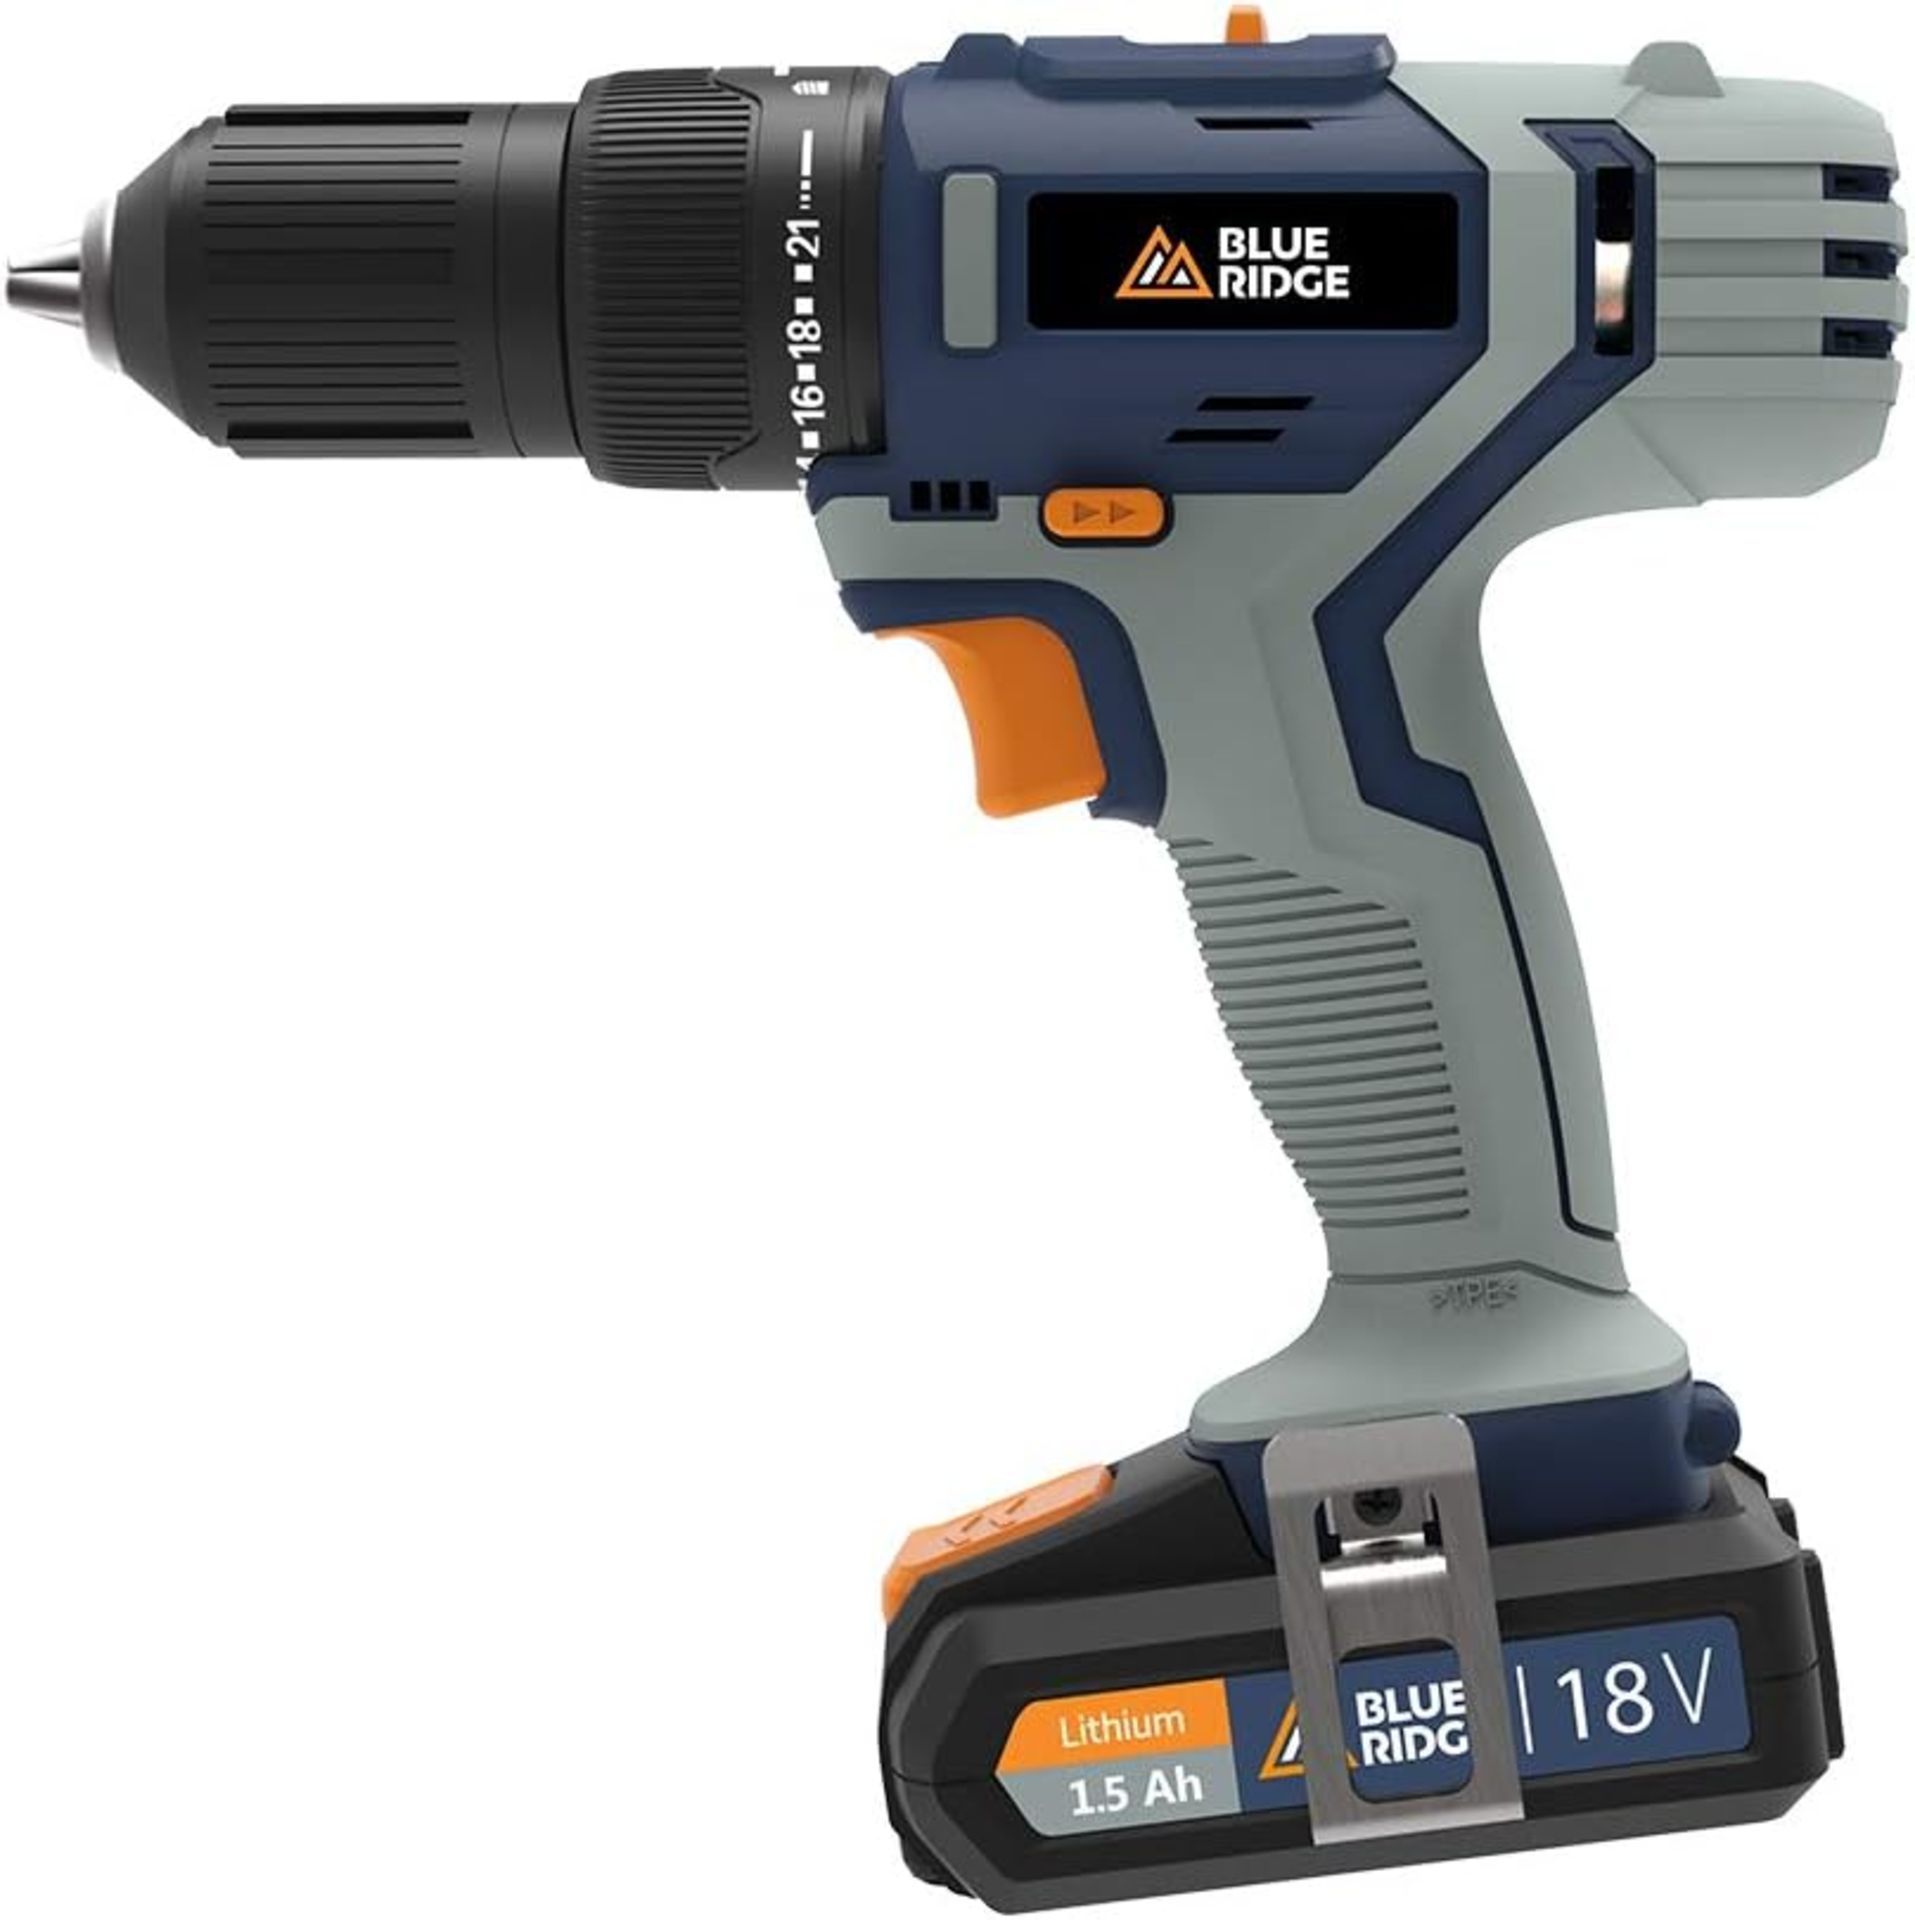 2x NEW & BOXED BLUE RIDGE 18V Cordless Hammer Drill with 2 x 1.5 Ah Li-ion Batteries & 43 Piece - Image 2 of 4